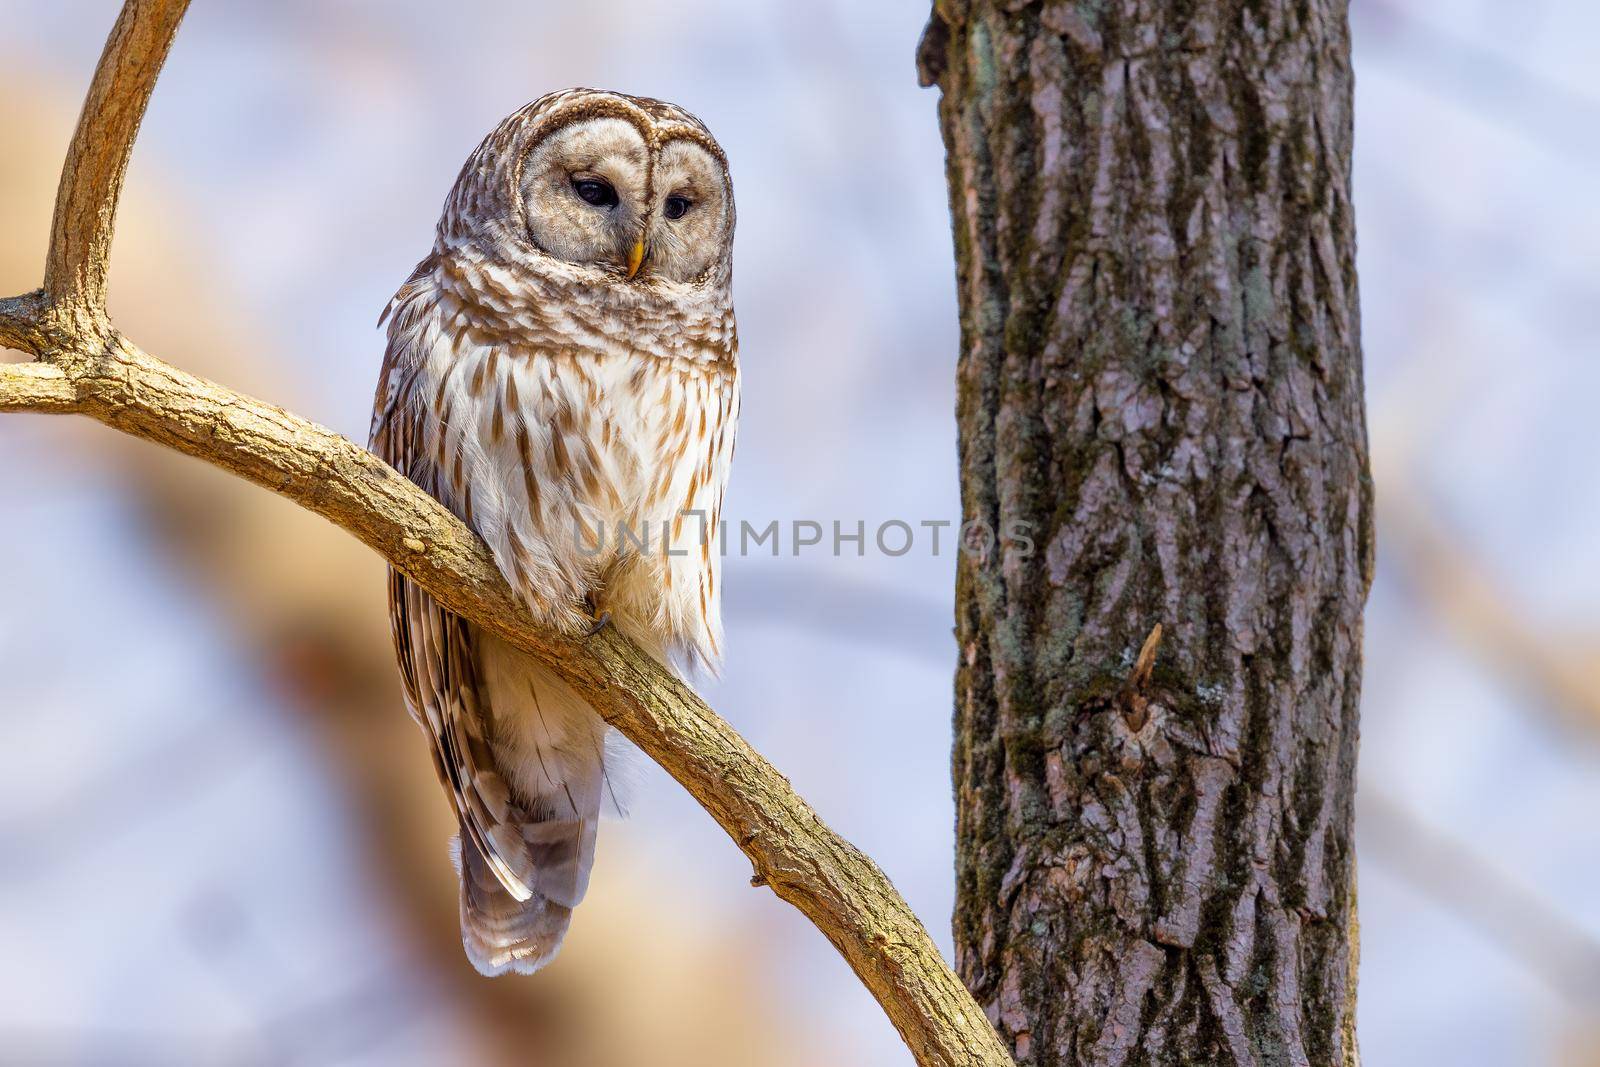 Barred owl mom watching over the nest in a forest in Ohio